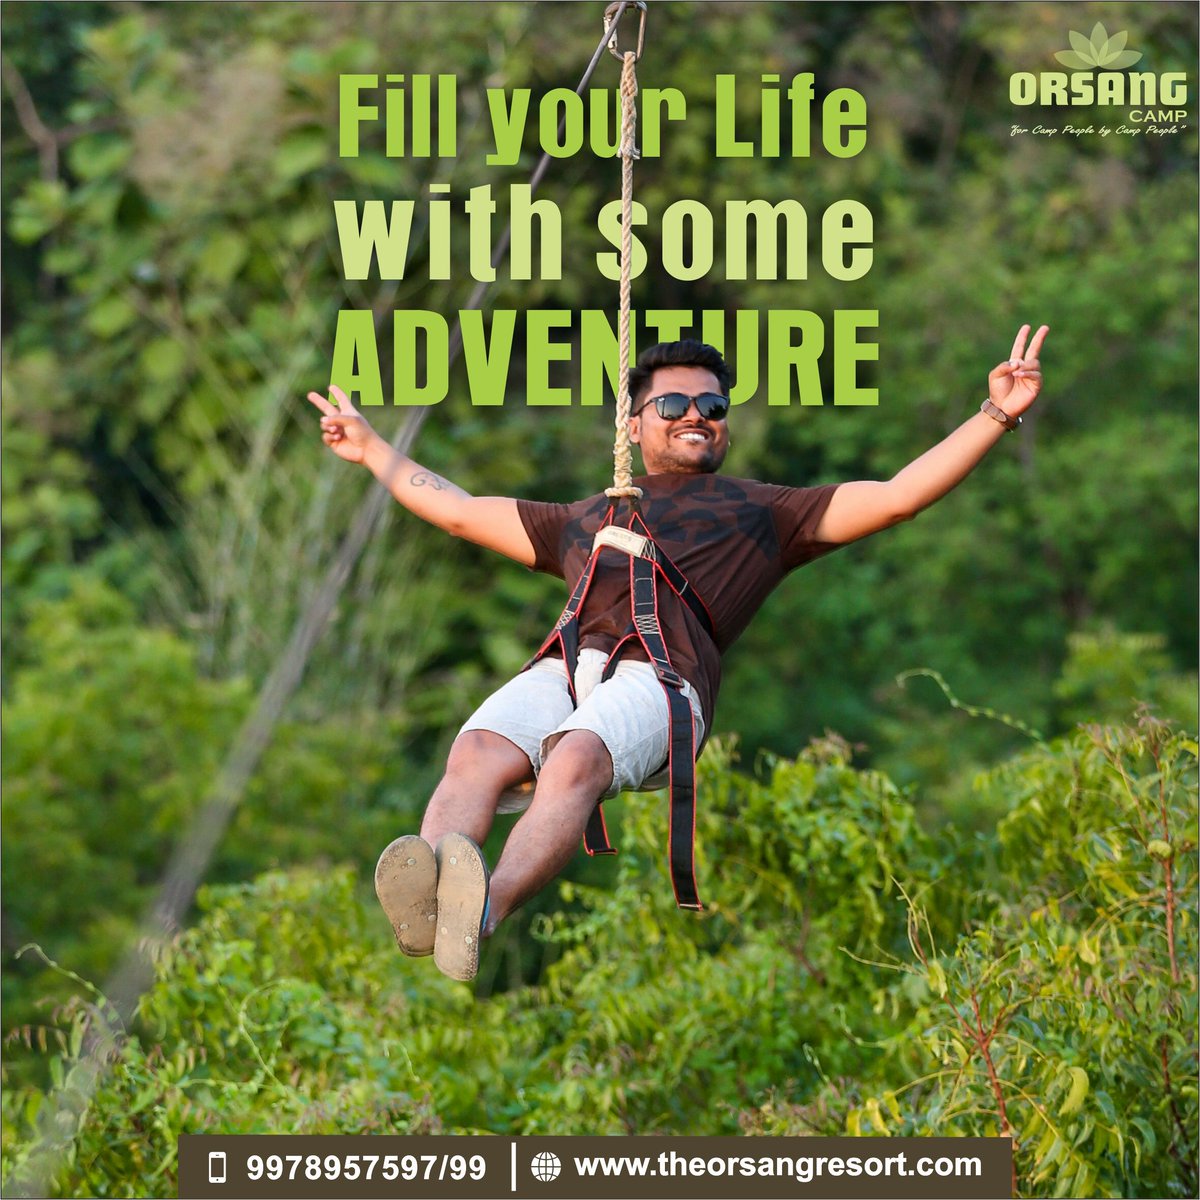 Adventure is the thrilling way to learn. 

Website: buff.ly/2HBiPqI | Mobile: +91 9978957597

#Adventure #Campsite #AdventureCamping #OrsangCamp #OrsangGroup